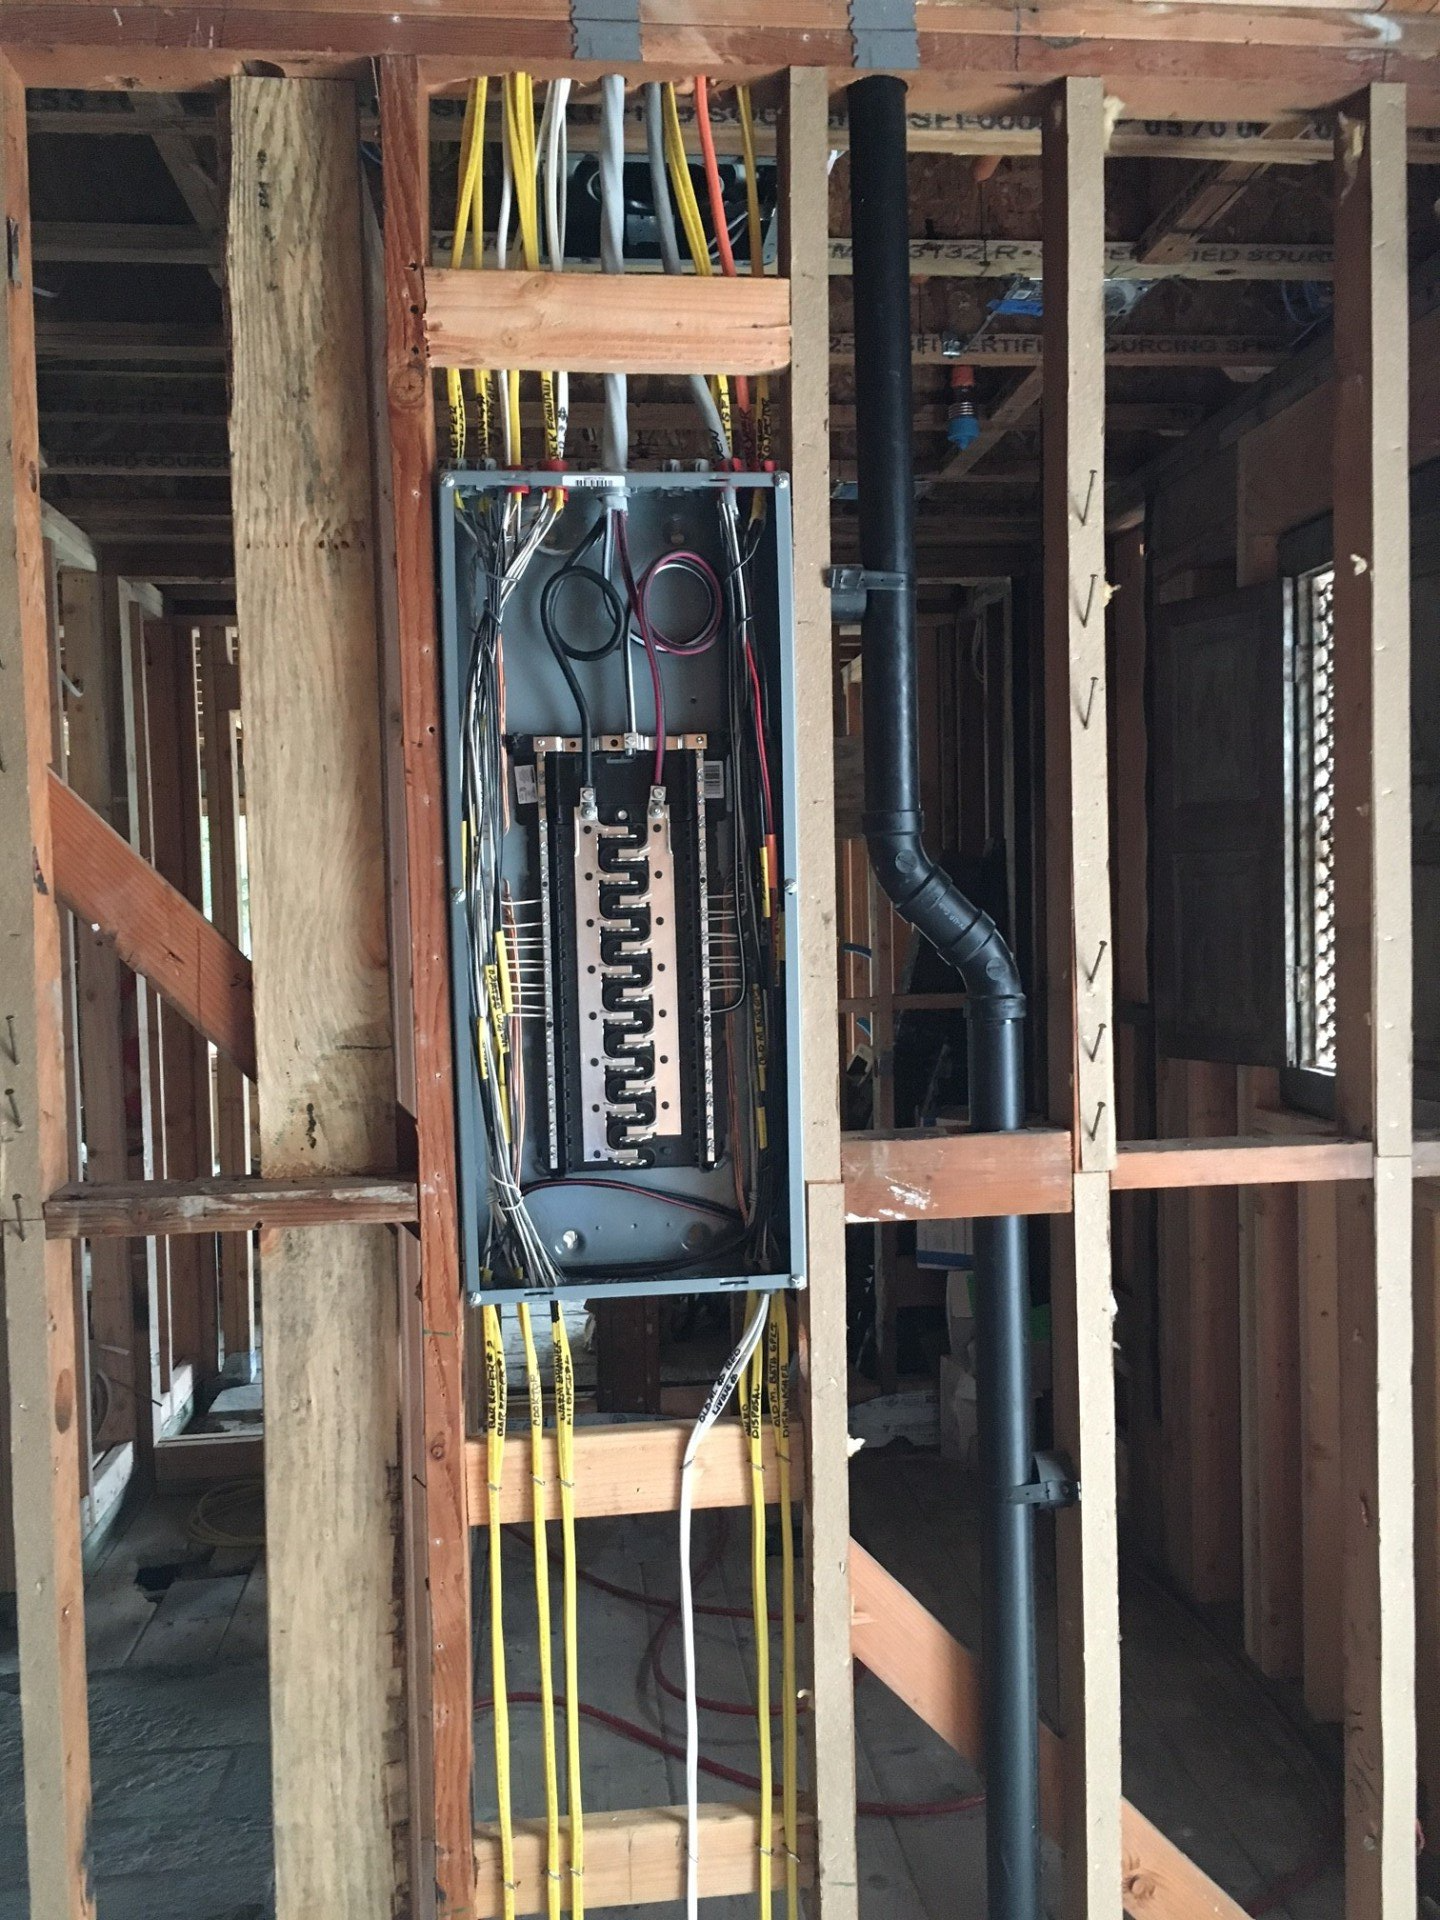 Cable Wires - Electrical contractor services in Salinas, CA